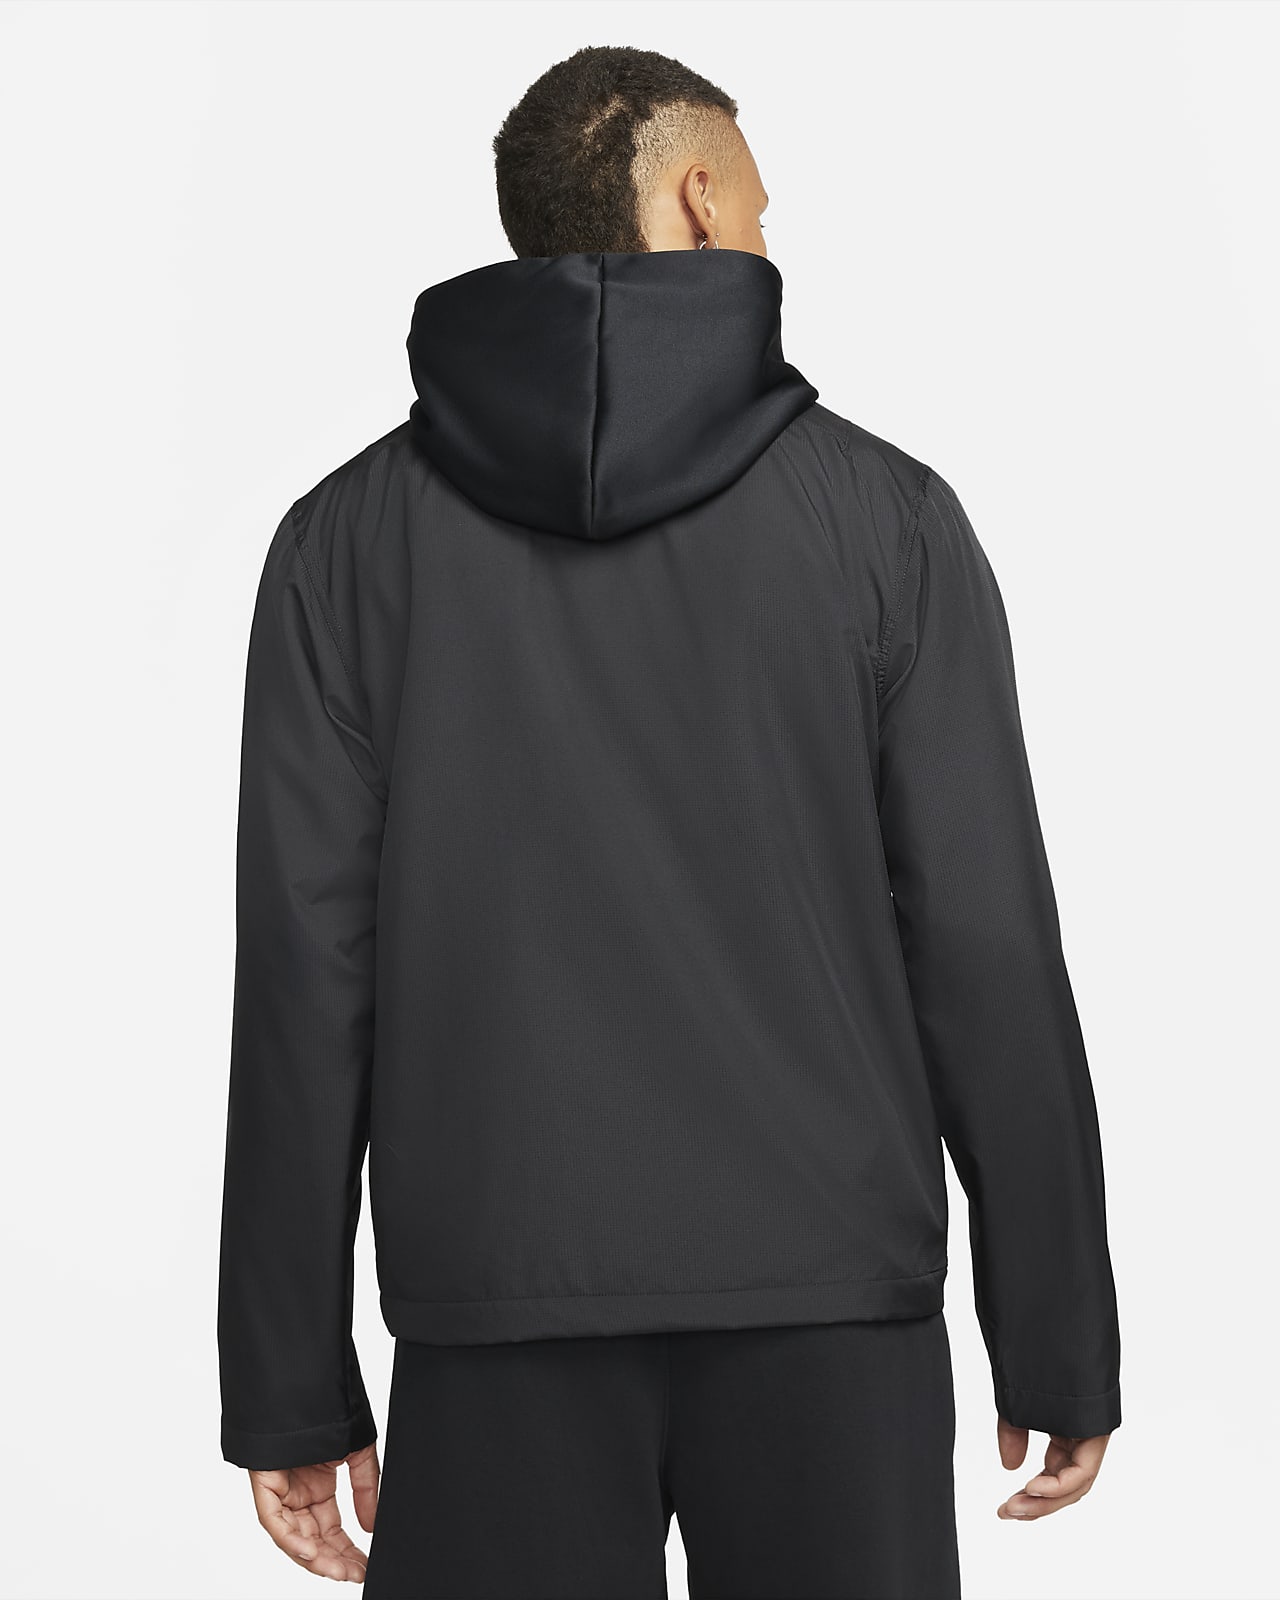 Nike Thermal-Overbranded-Fleece Cou Warmer-Hood Course Hiver Adulte Jeunesse